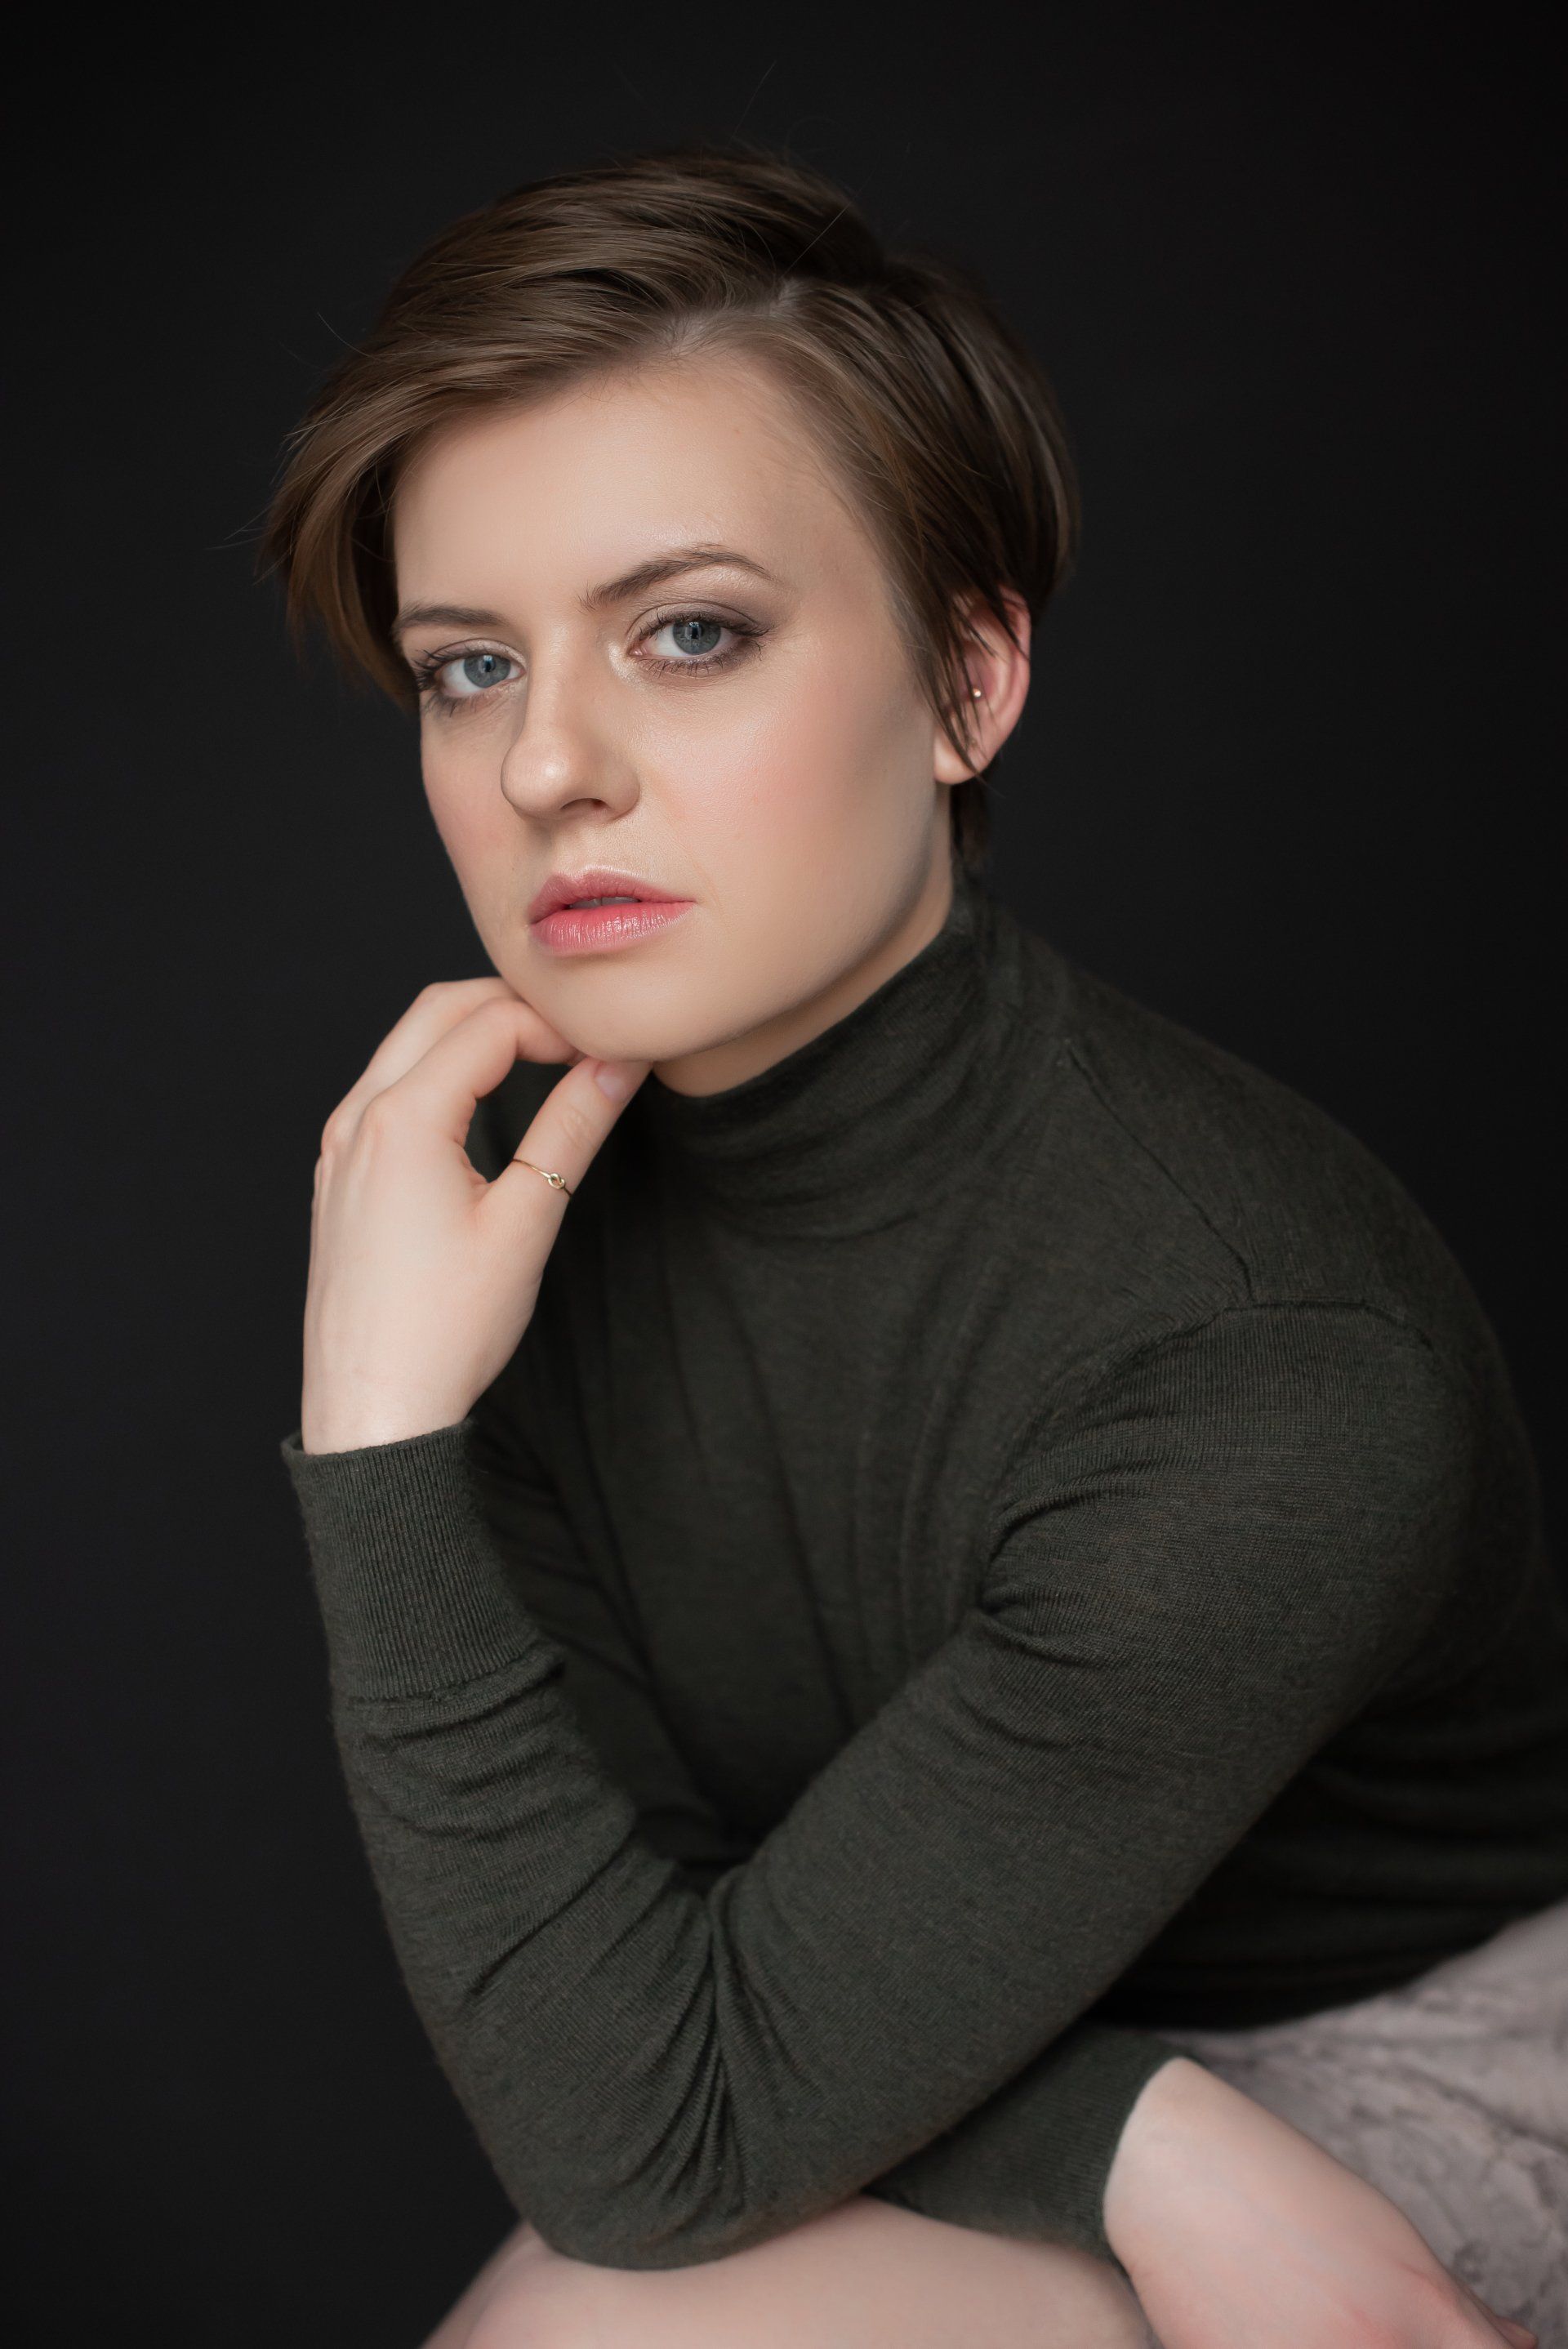 A young professional's headshot wearing a black turtleneck